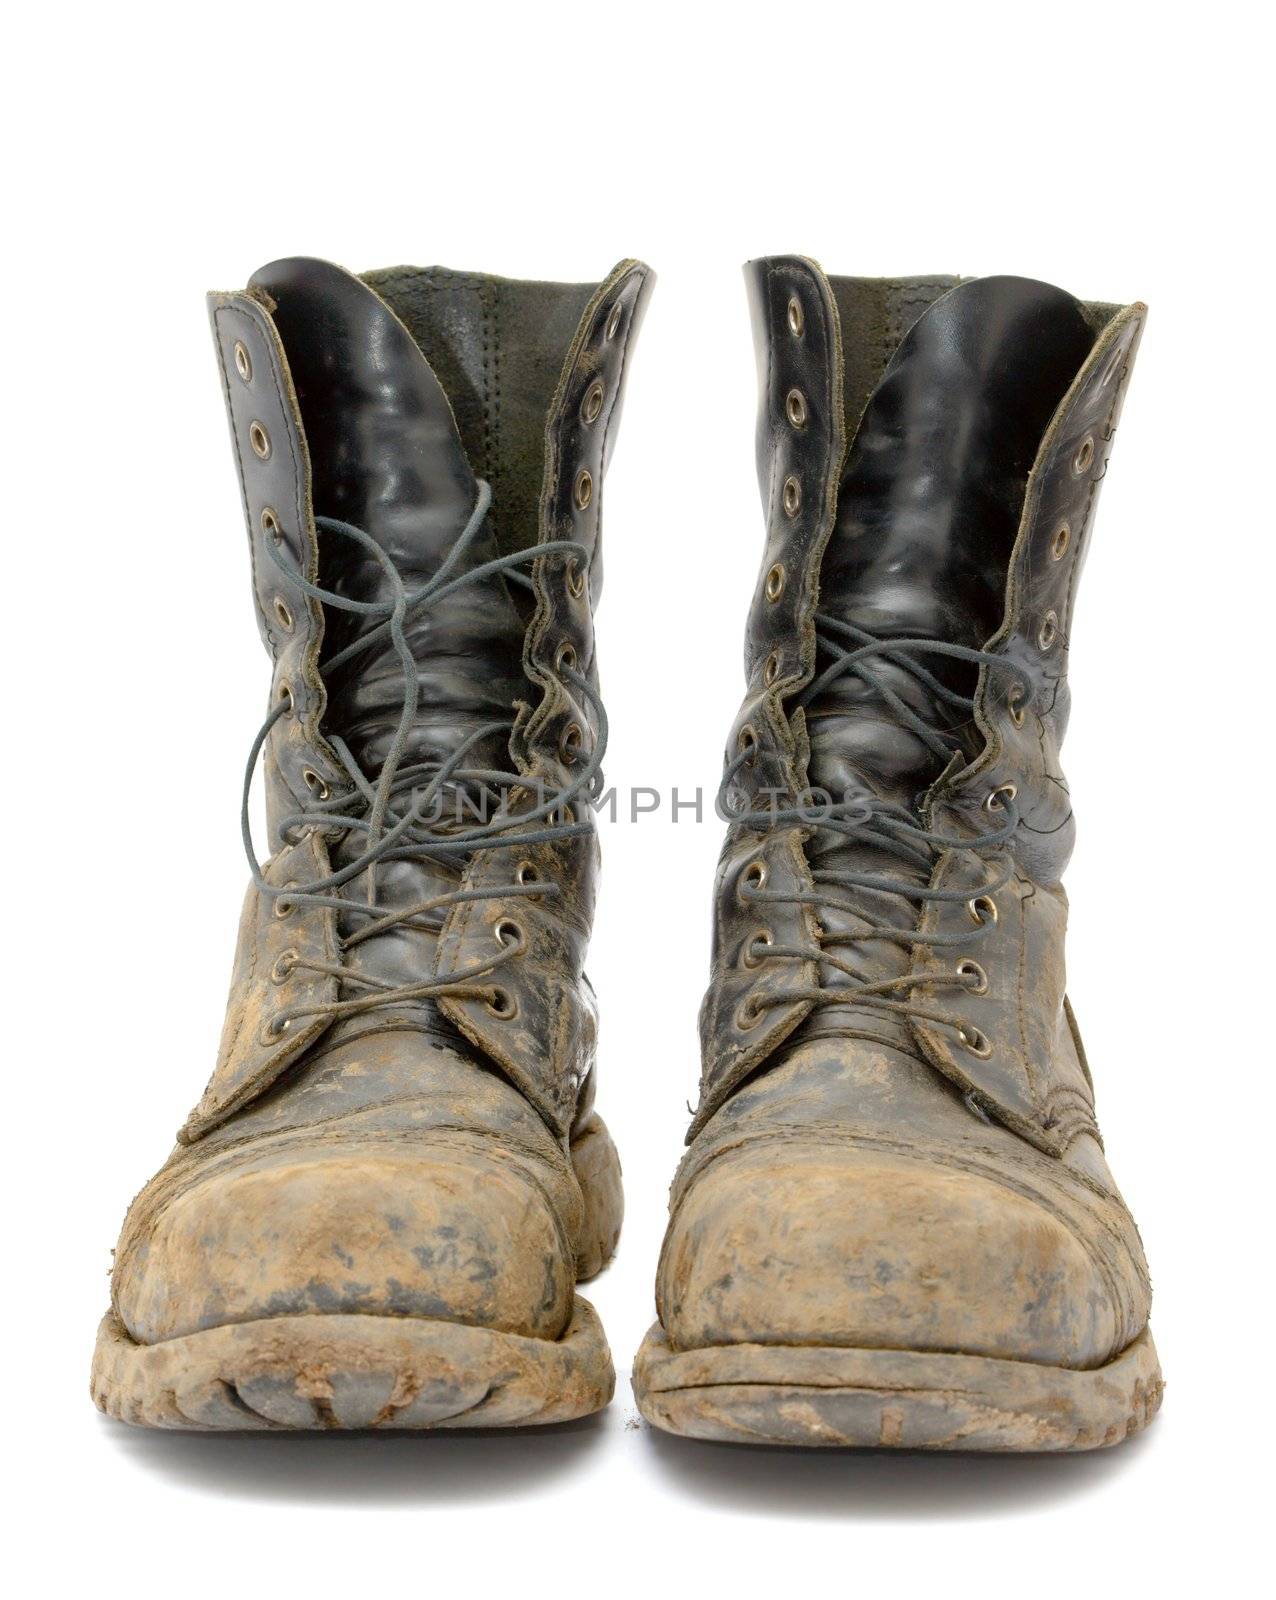 A pair of muddy boots